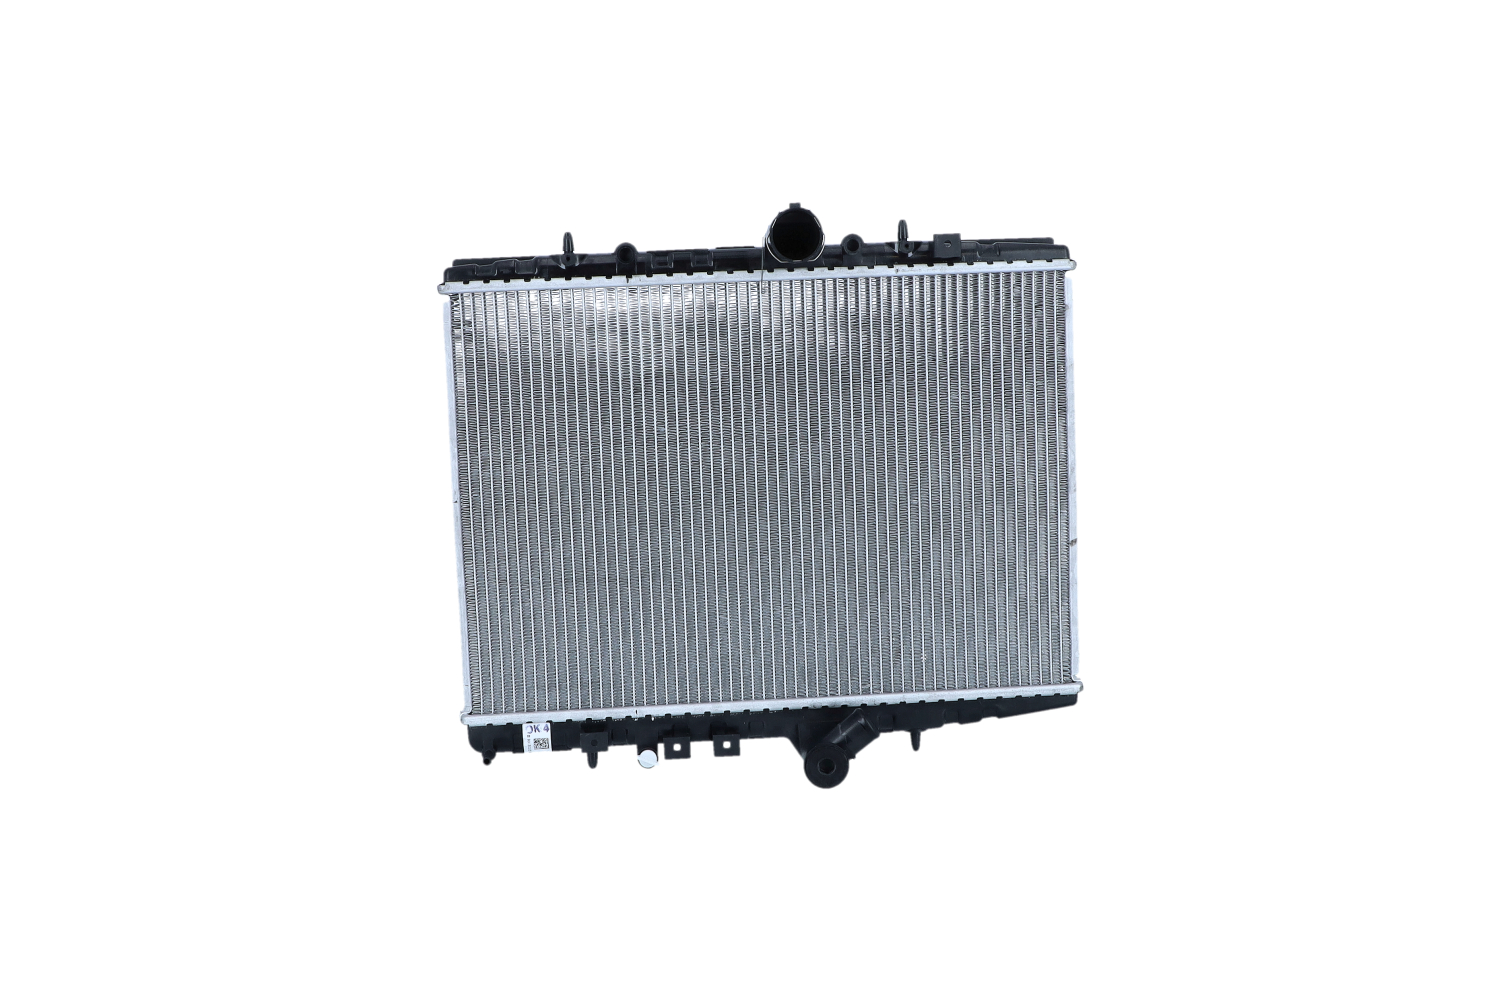 NRF EASY FIT 58351 Engine radiator Aluminium, 554 x 380 x 34 mm, with seal ring, Brazed cooling fins